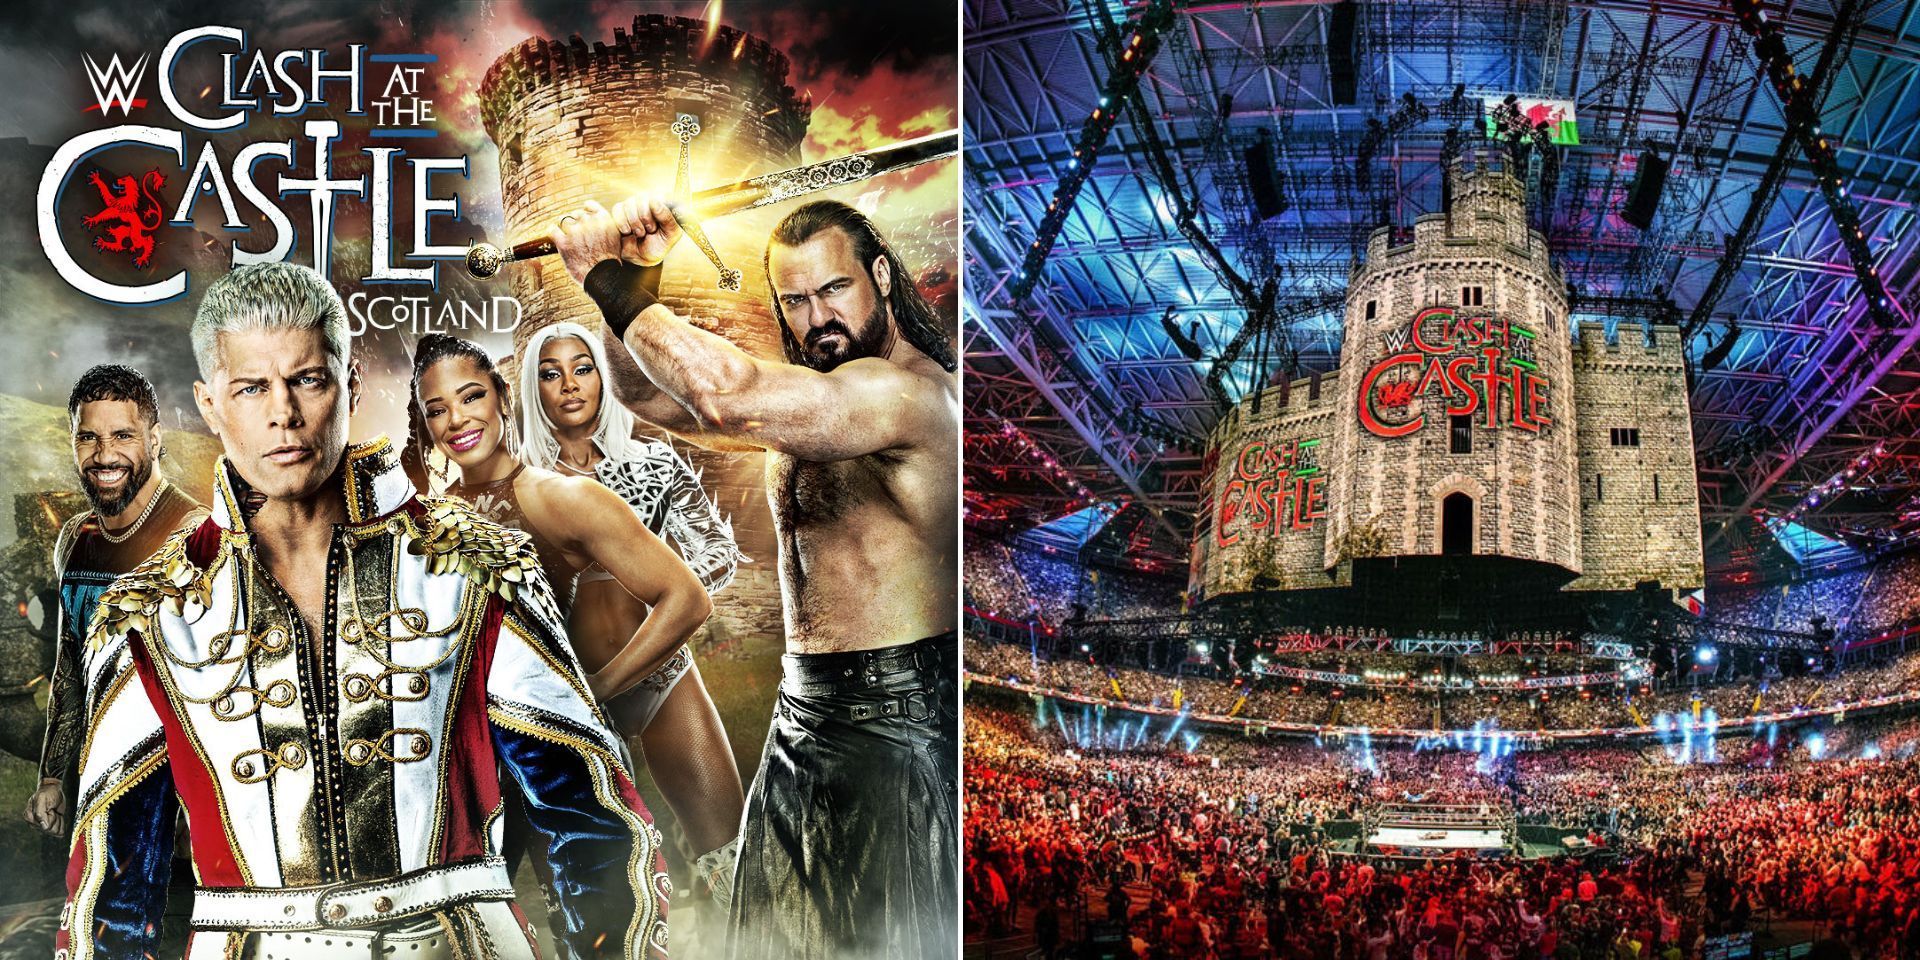 A big title match has been teased for WWE Clash at the Castle